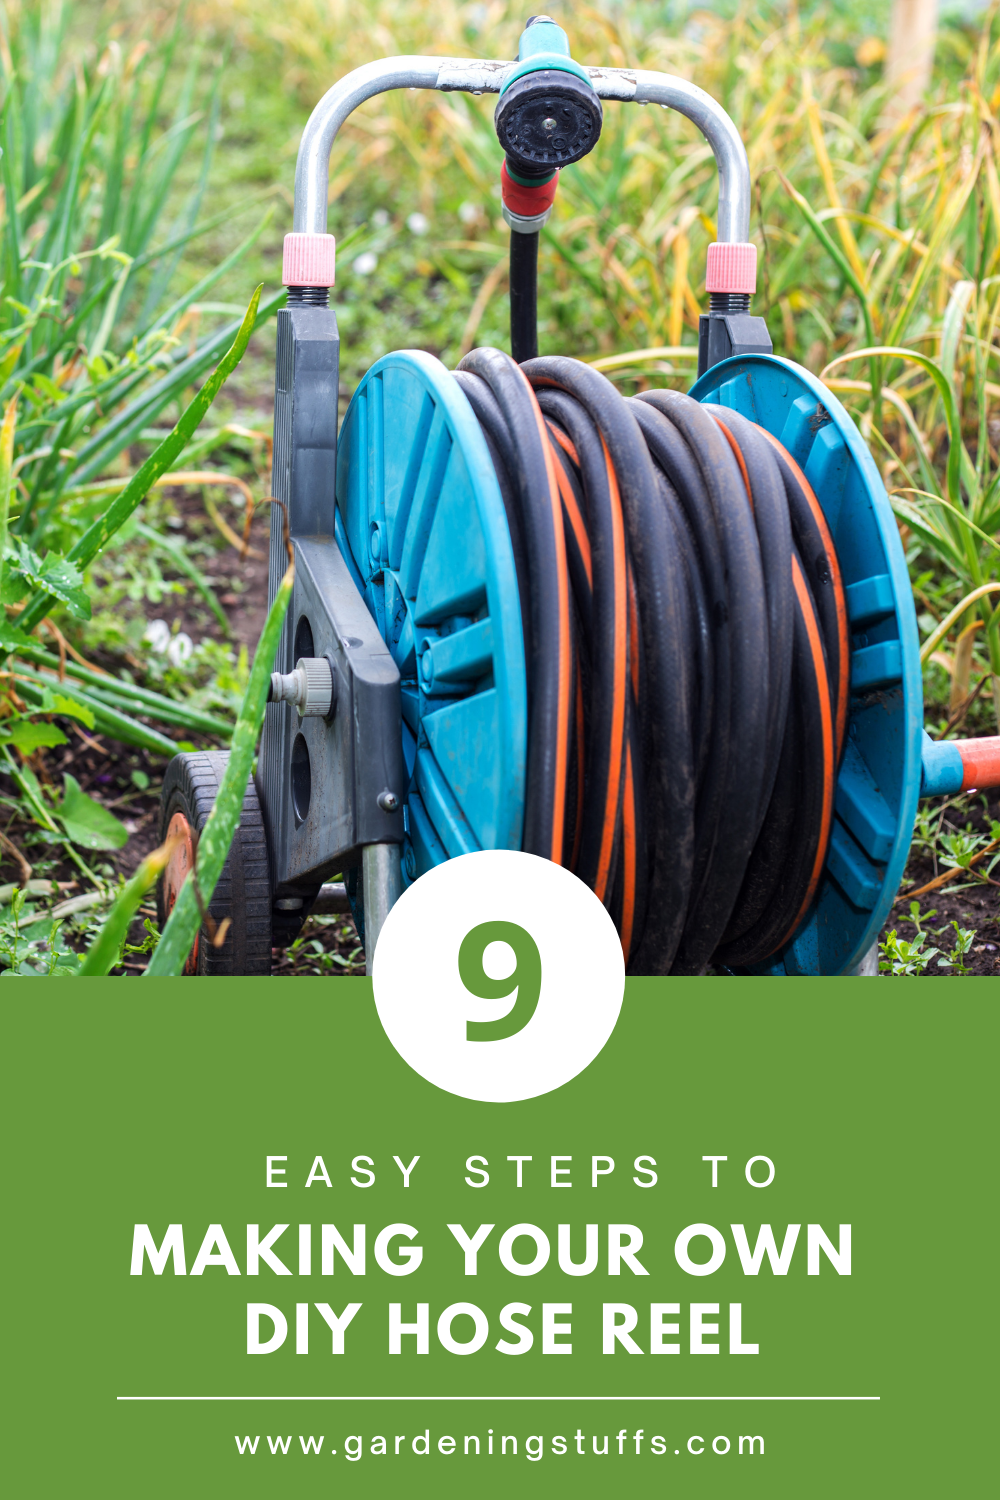 It is always better to use a hose reel to store your garden hose as this increases the life significantly. Read on how to make your own DIY hose reel with these easy steps guide. This way, you won’t have to spend money on purchasing one from the market.